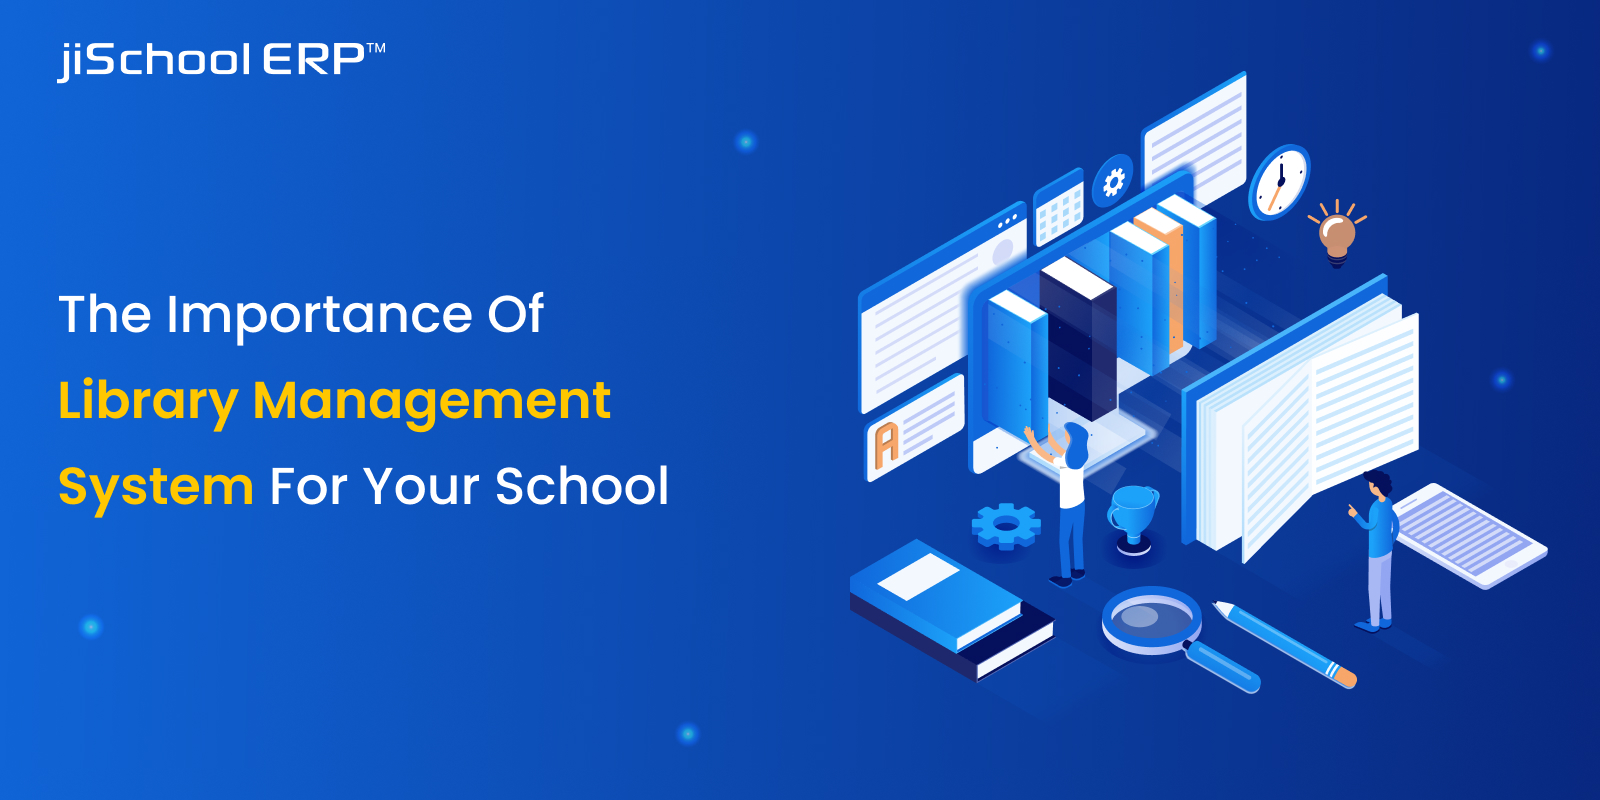 The Importance Of Library Management System For Your School